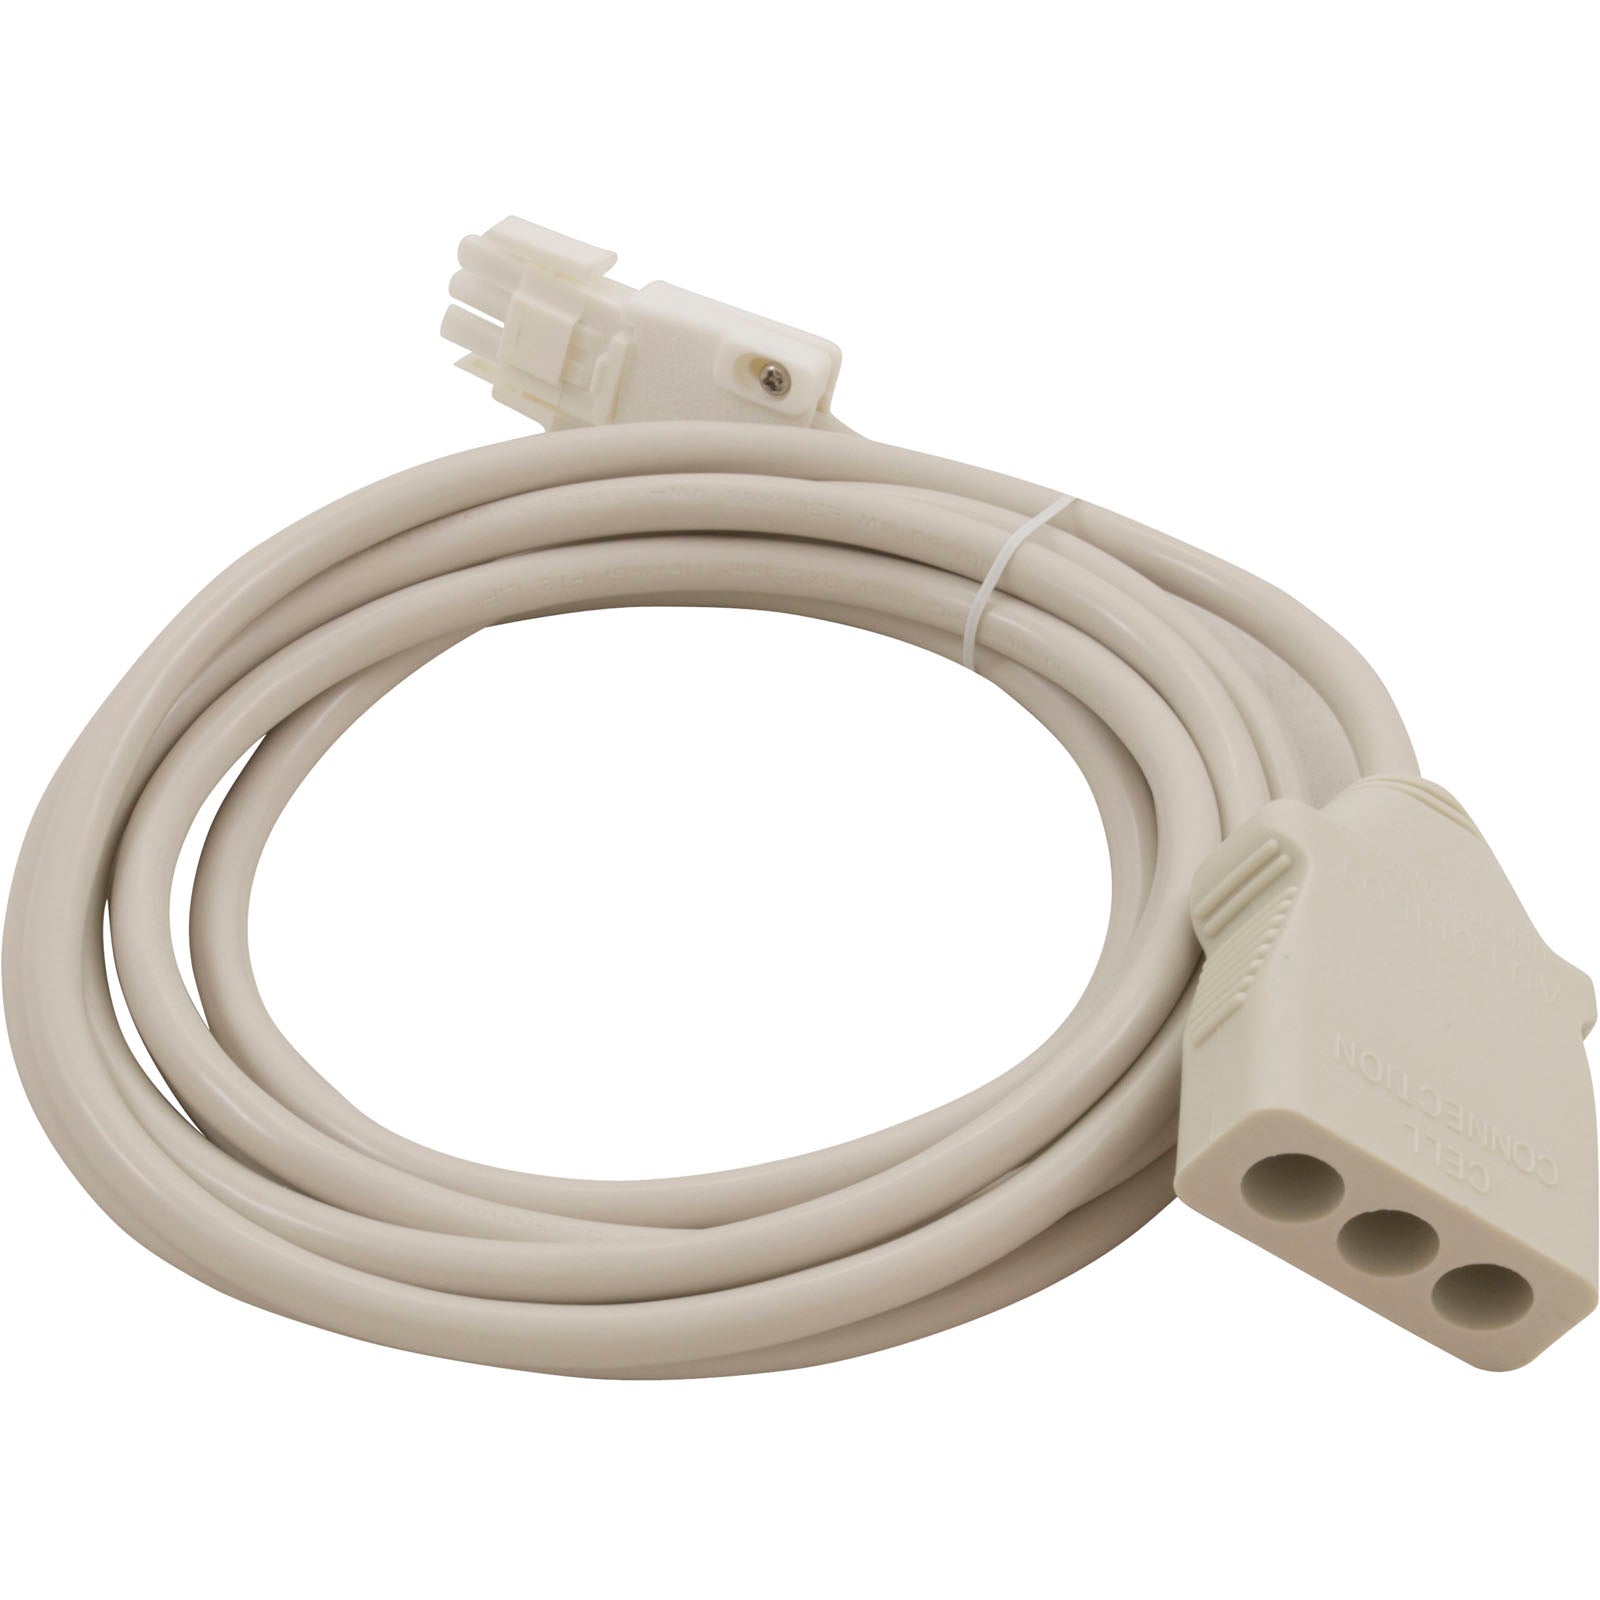 Cell Cord, AutoPilot, 12ft with 3 Pin Mate-n-Lock Connecter/952